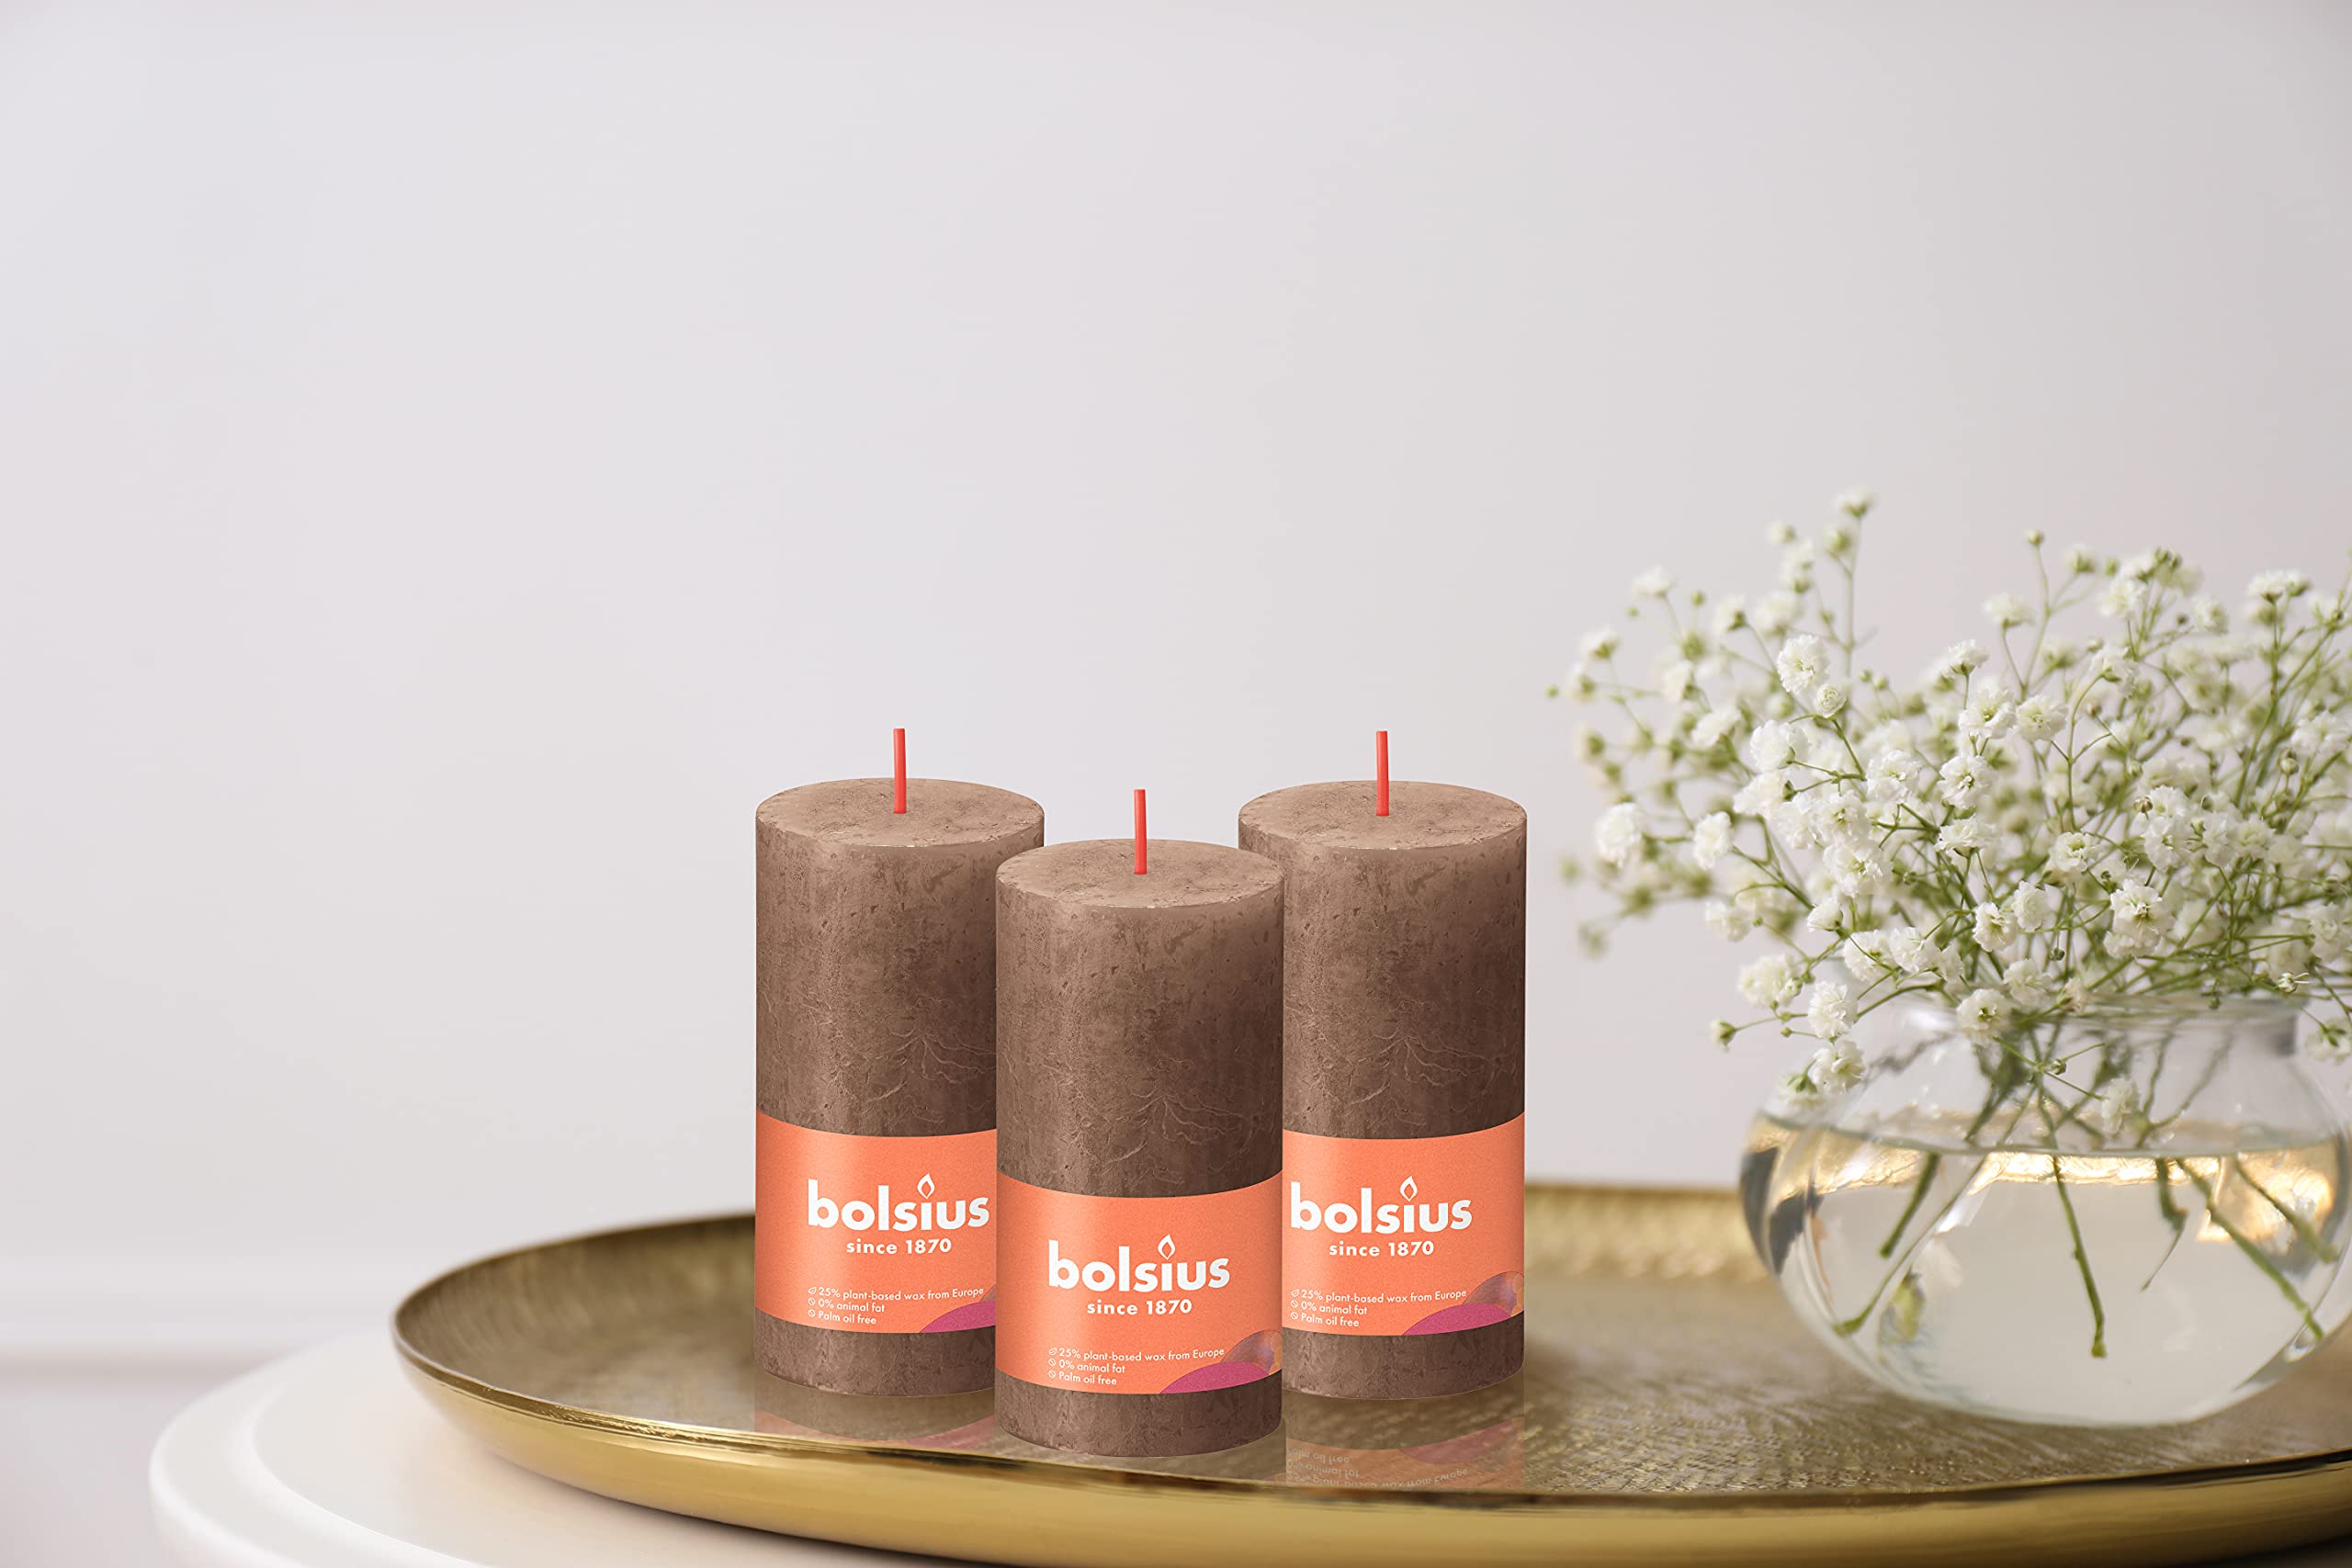 BOLSIUS 4 Pack Suede Brown Rustic Pillar Candles - 2 X 4 Inches - Premium European Quality - Includes Natural Plant-Based Wax - Unscented Dripless Smokeless 30 Hour Party D�cor and Wedding Candles  - Acceptable